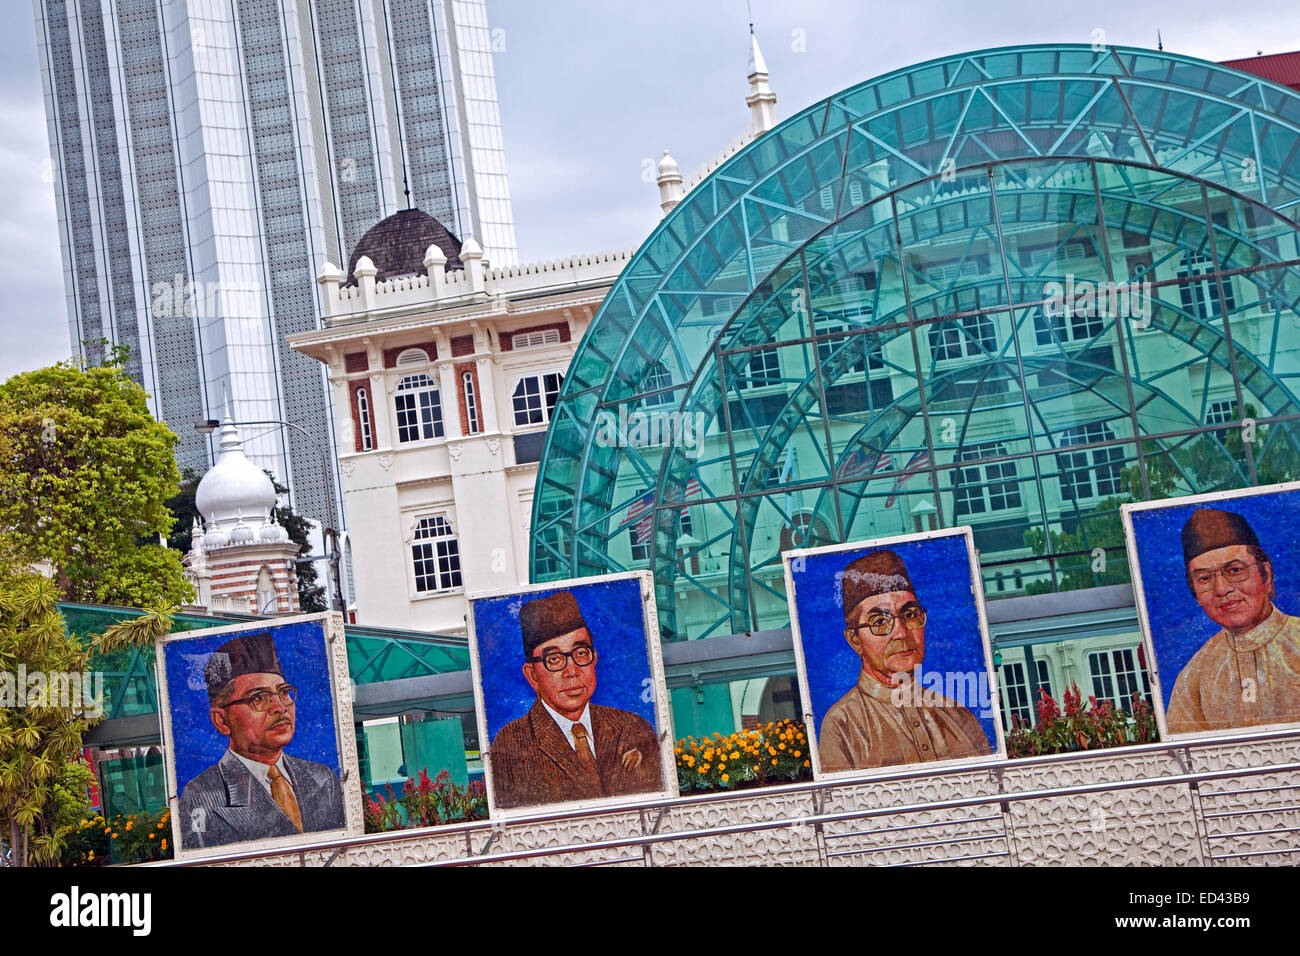 Mosaics show the portraits of past and present Malaysian prime ministers at Merdeka Square in the city Kuala Lumpur, Malaysia Stock Photo